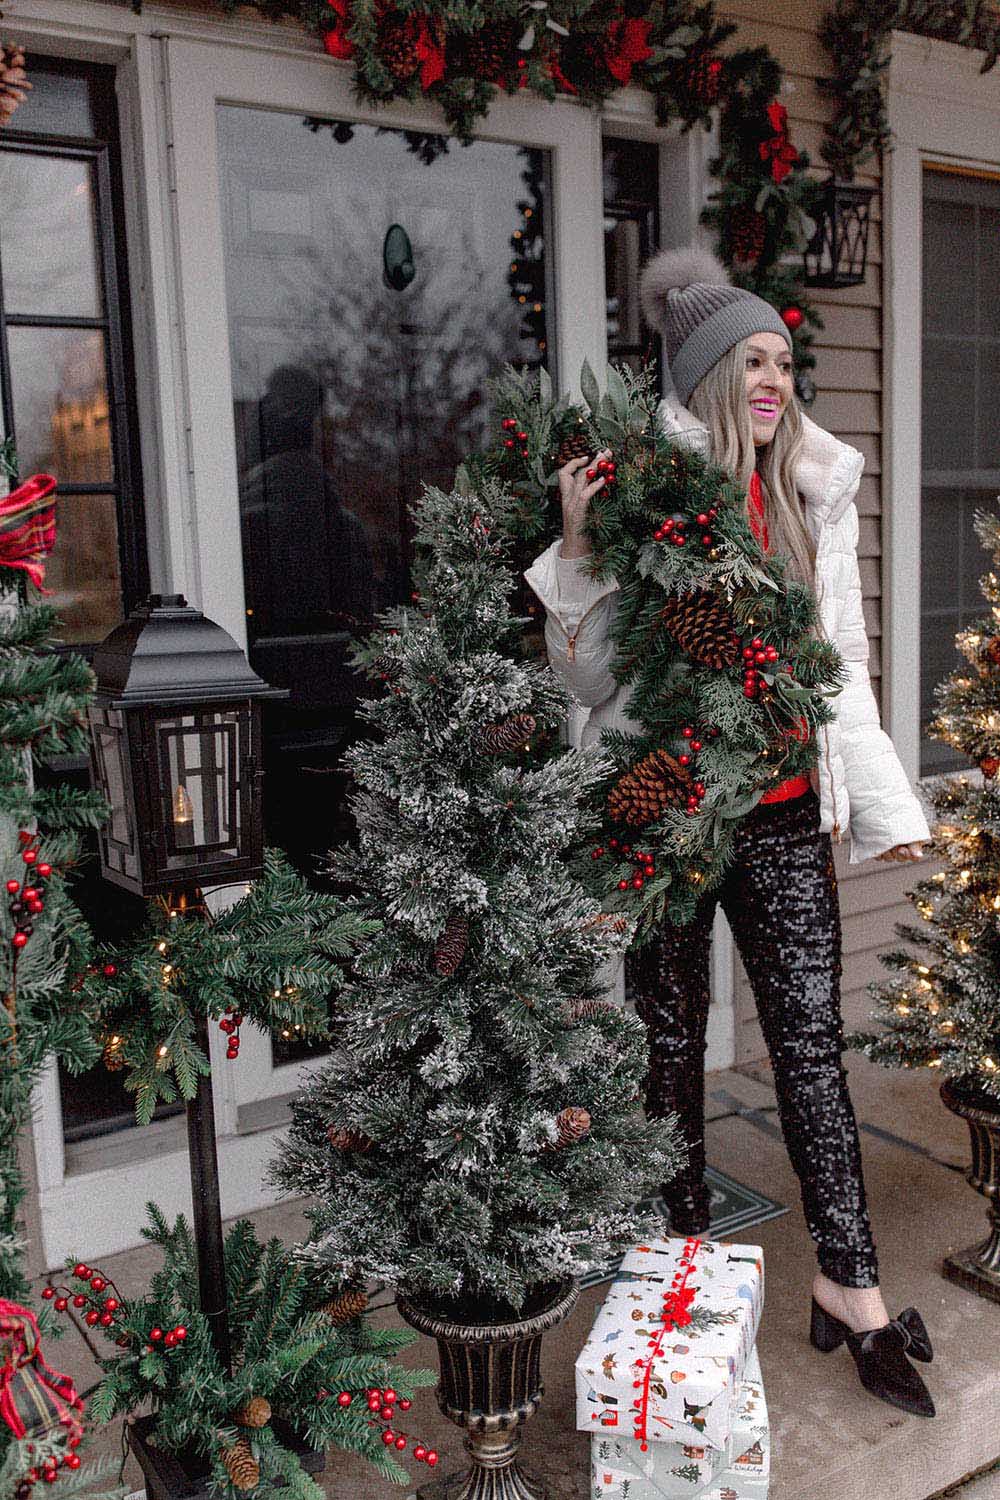 A person standing next to a Christmas tree on front porch